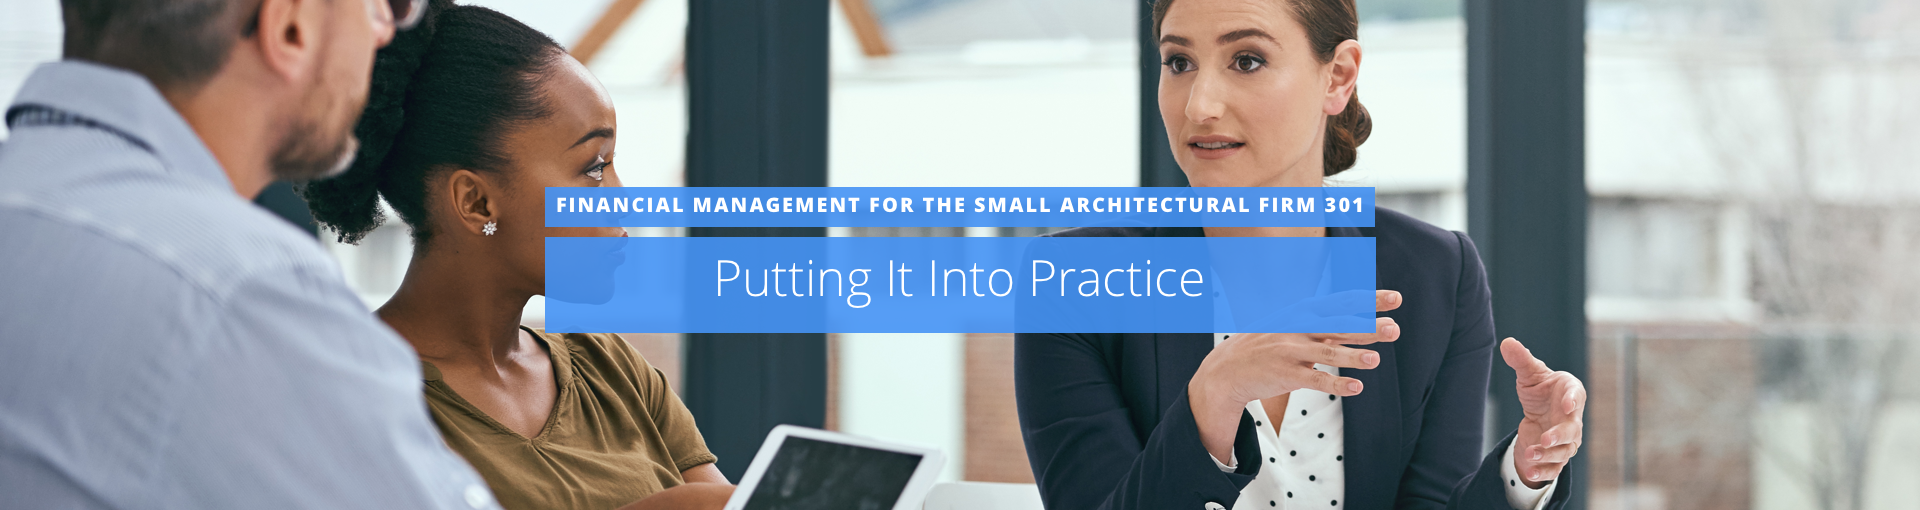 Financial Management for the Small Architectural Firm 301: Putting It Into Practice Featured Image